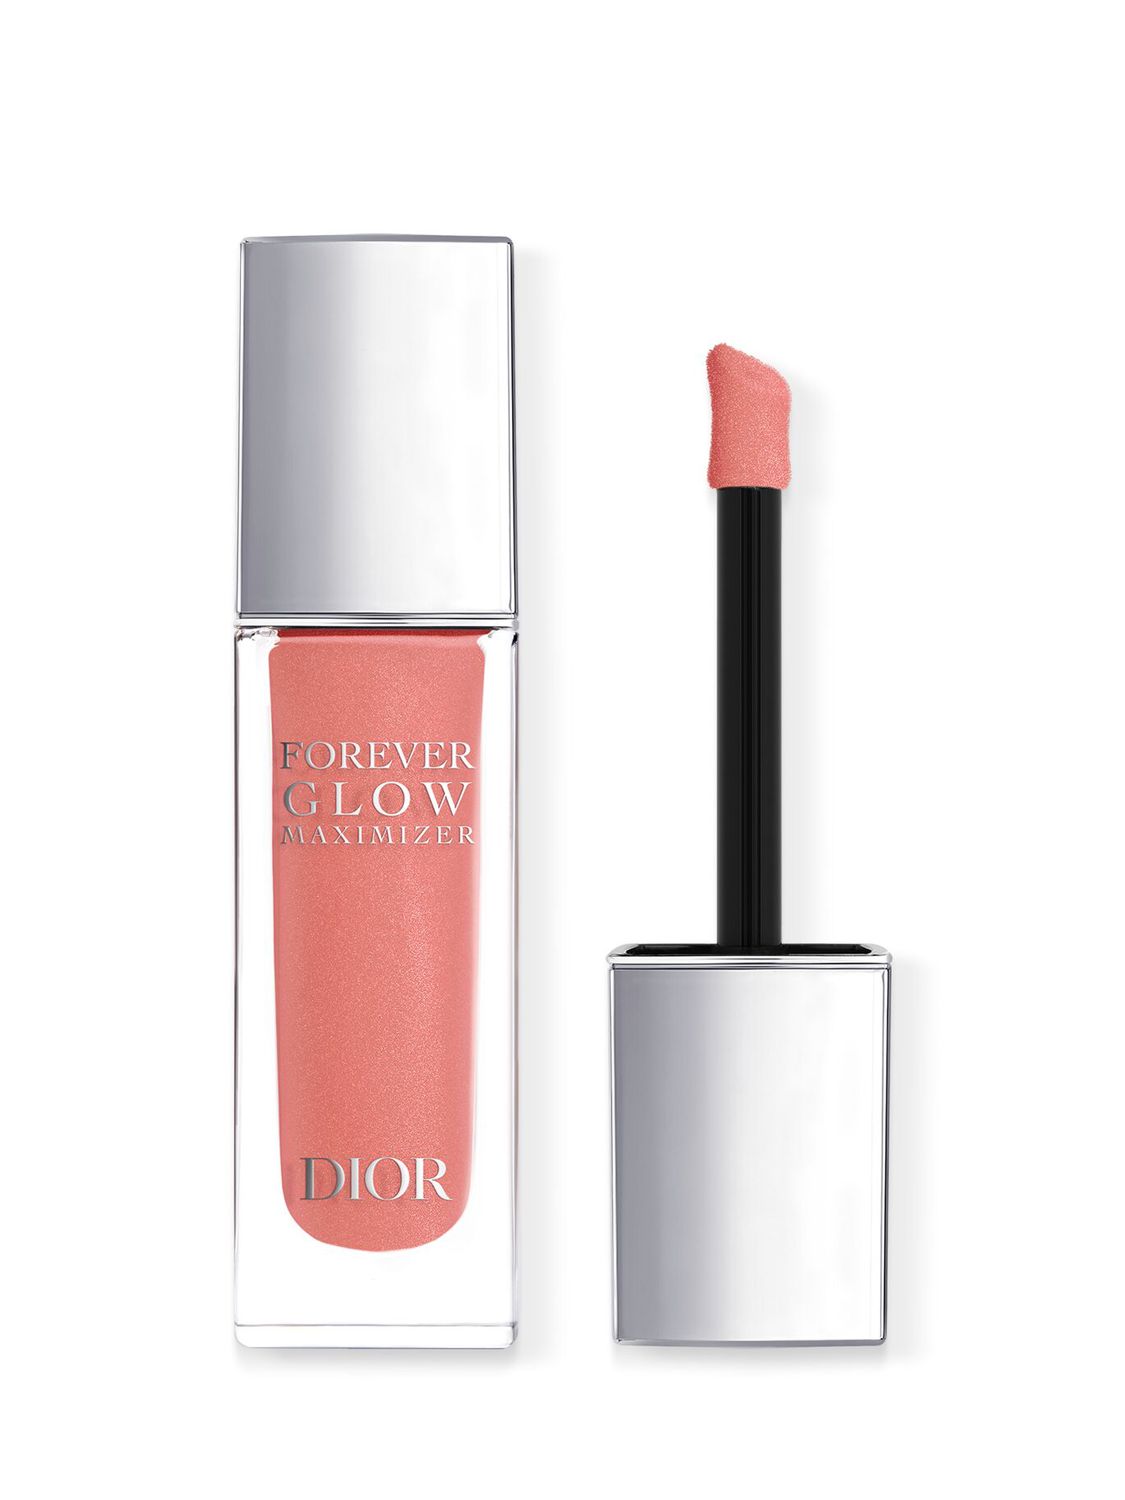 DIOR Forever Glow Maximizer, 014 Rosy